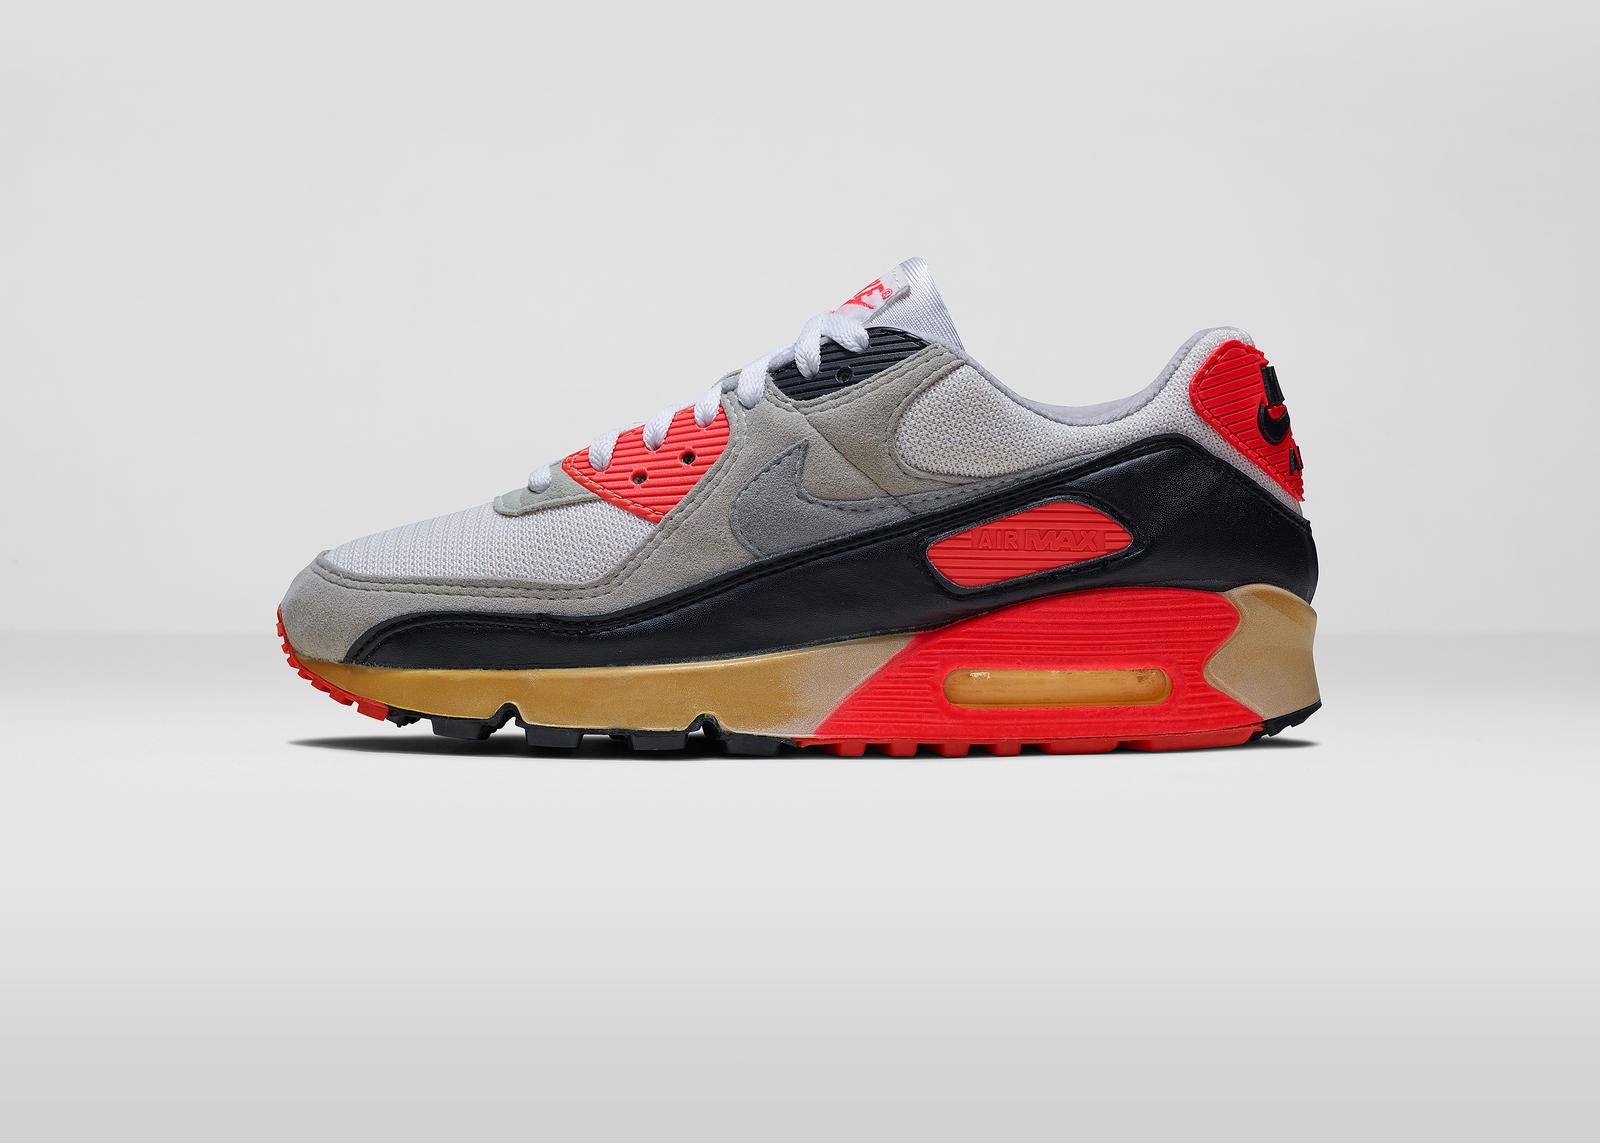 This Nike Air Max 90 Was Made For A Celebration - Sneaker News